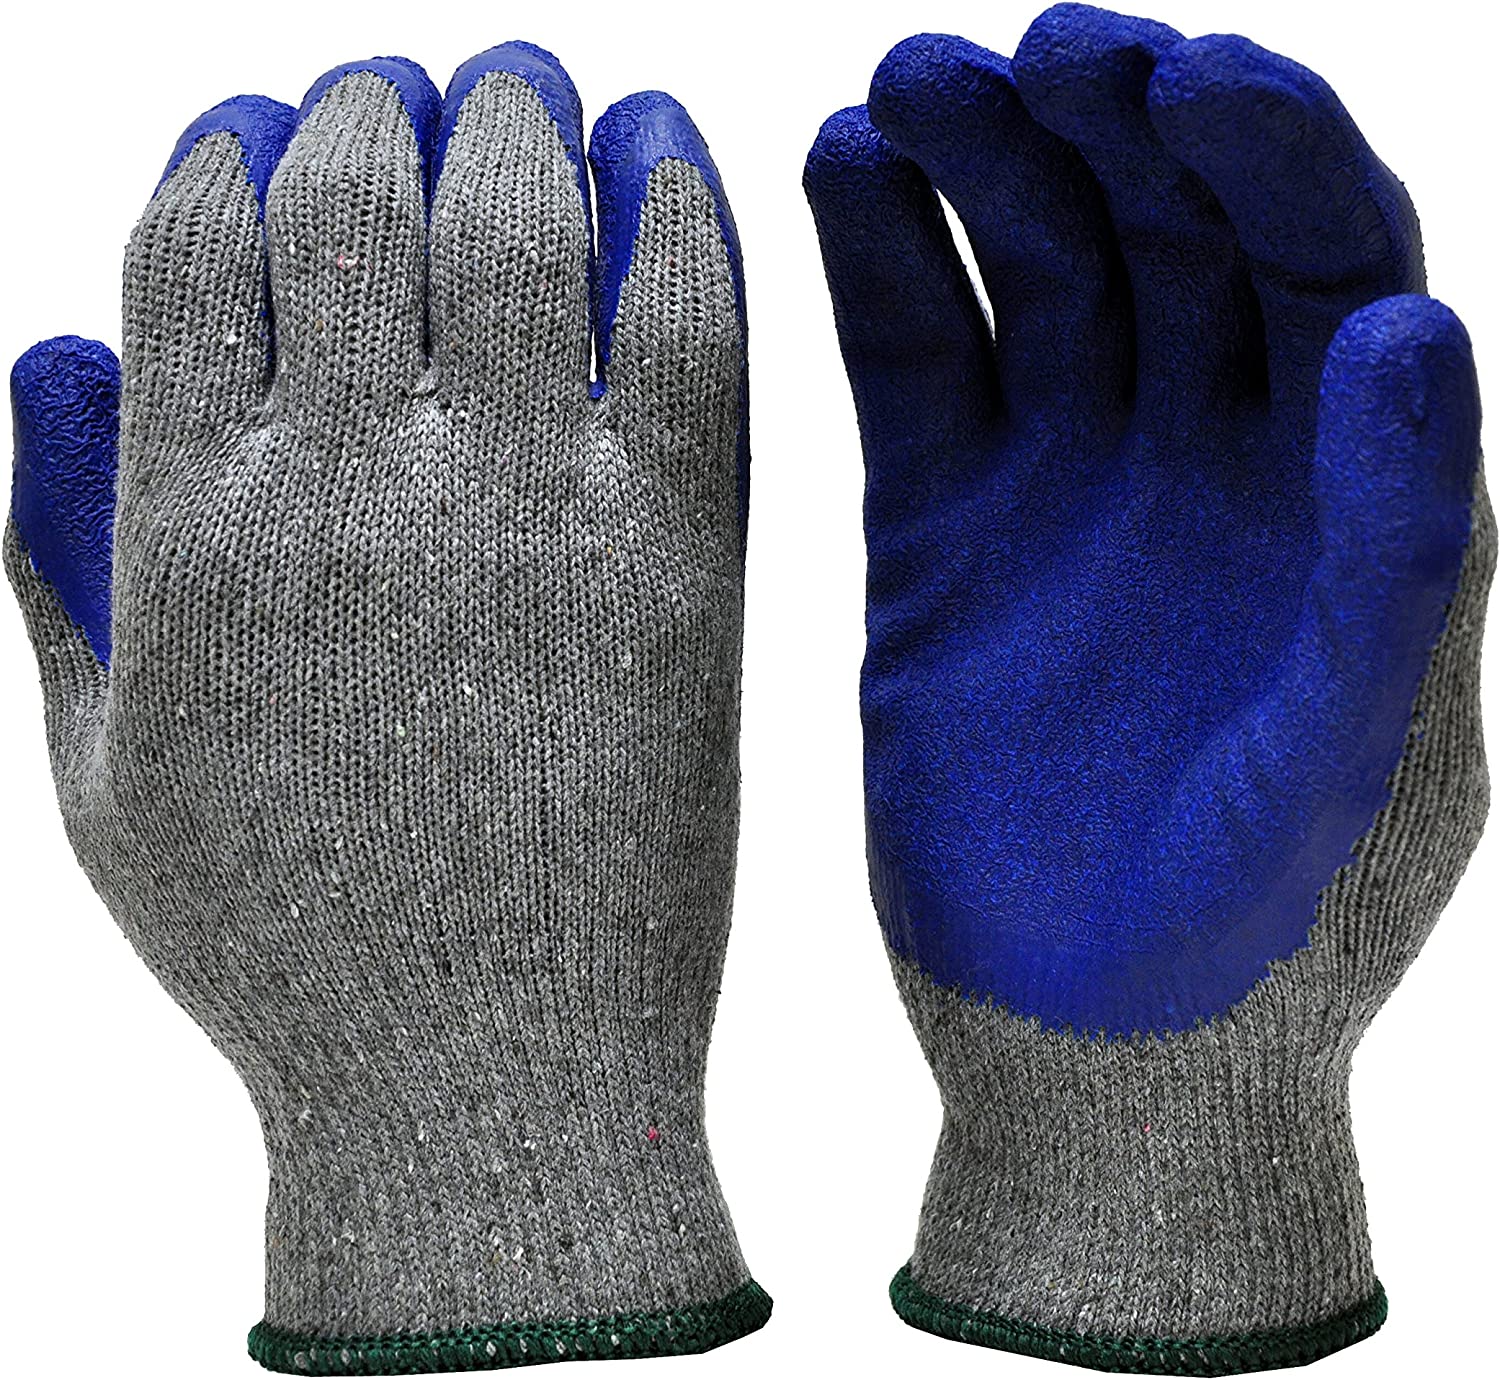 G & F 1511L-DZ Rubber Latex Coated Work Gloves for [...]